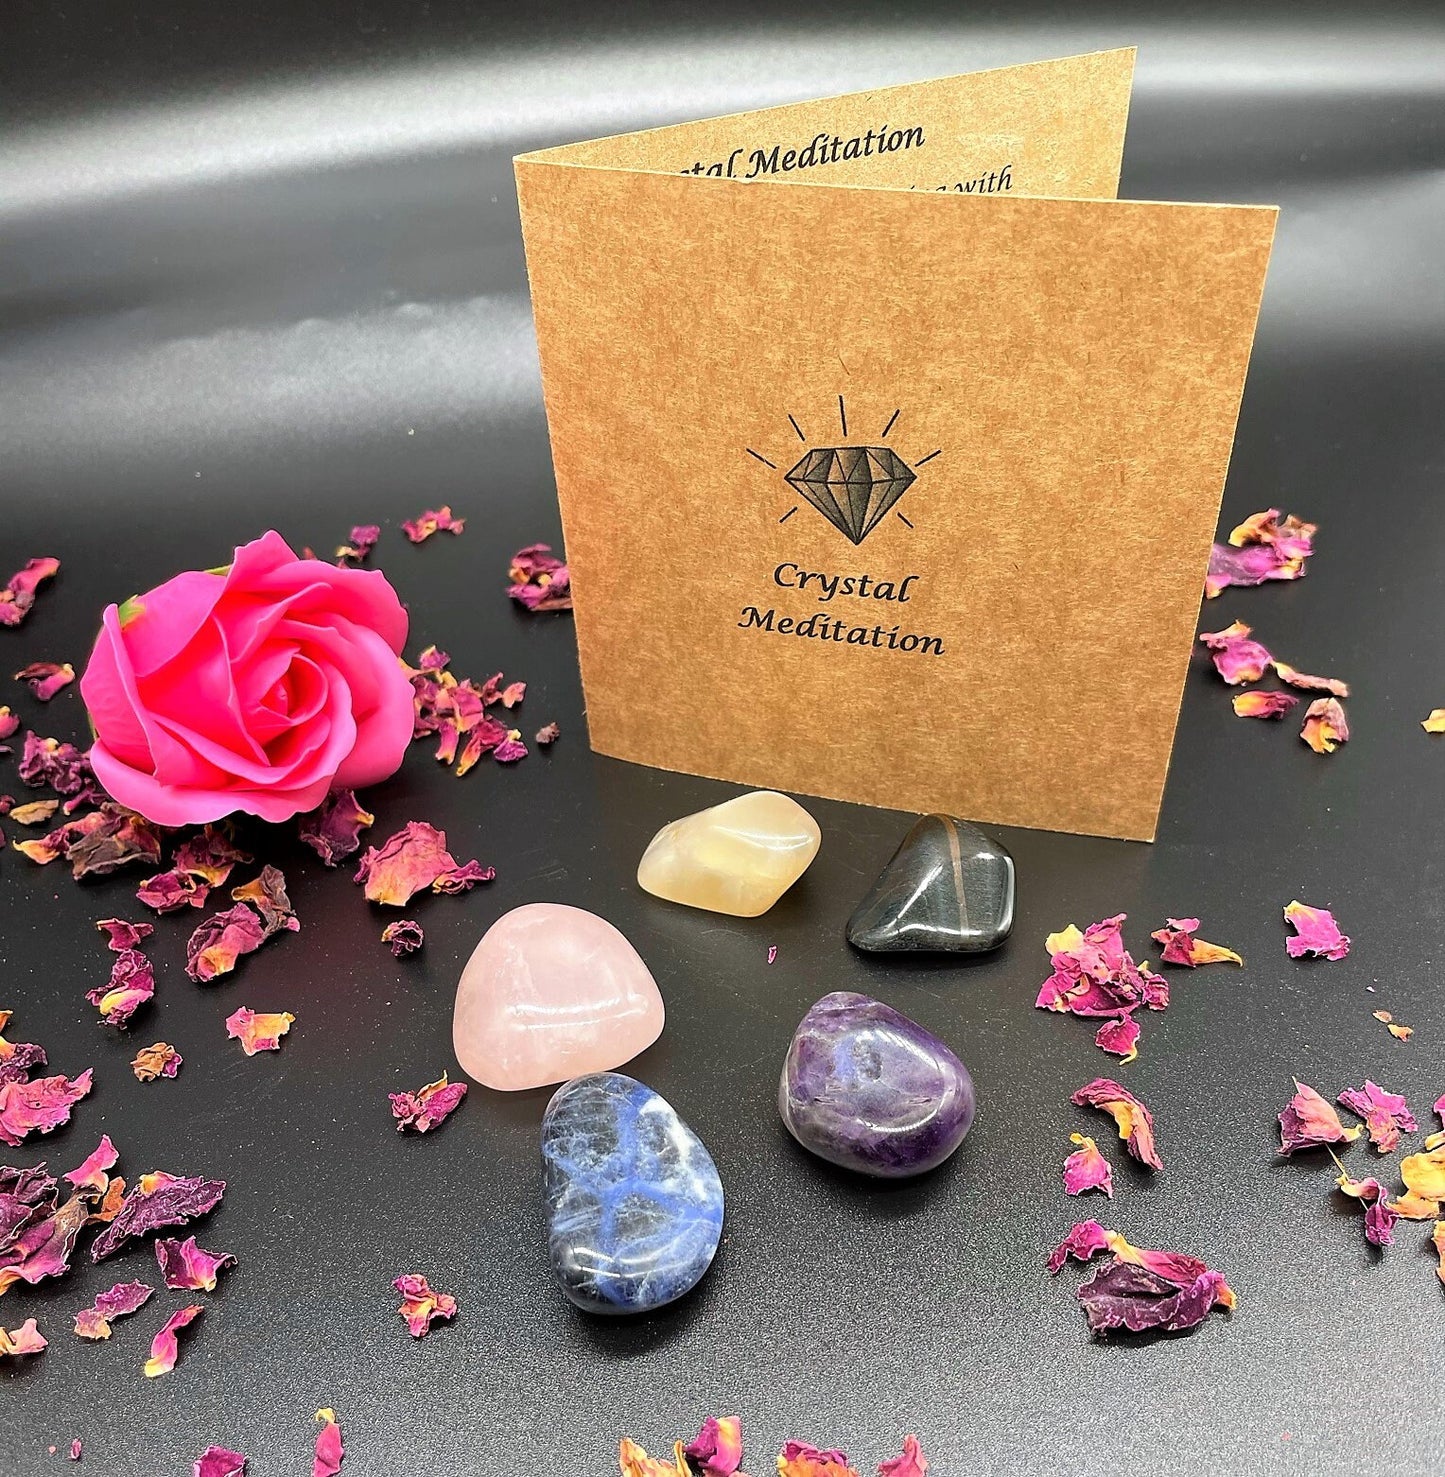 The Ultimate Gift Box, Complete Mindfulness, Oil Burner, Incense, Healing Crystals, Gua Sha Massage, Rose Quartz, Spa Products